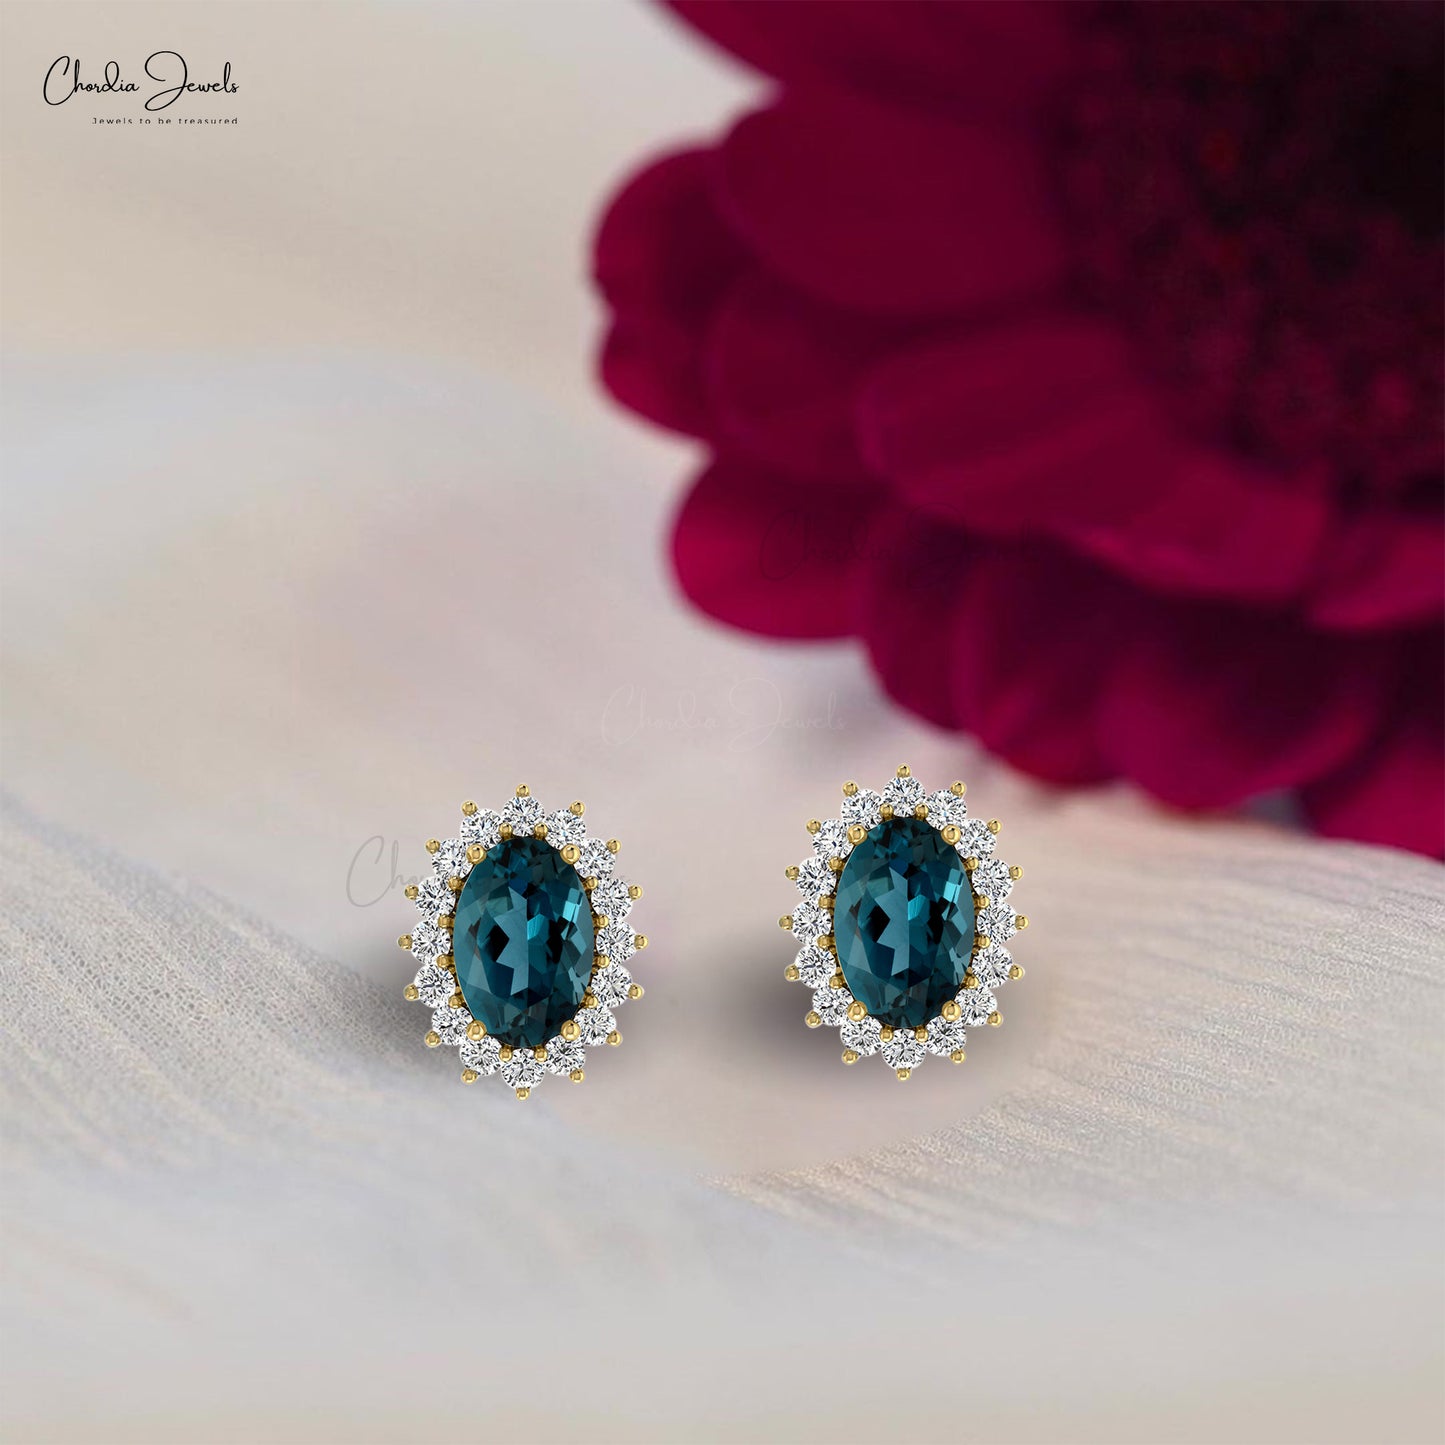 AAA London Blue Topaz Earrings 1.08Ct Oval Shape Natural Gemstone Summer Jewelry 14k Real Gold Hallmarked Earrings For Her